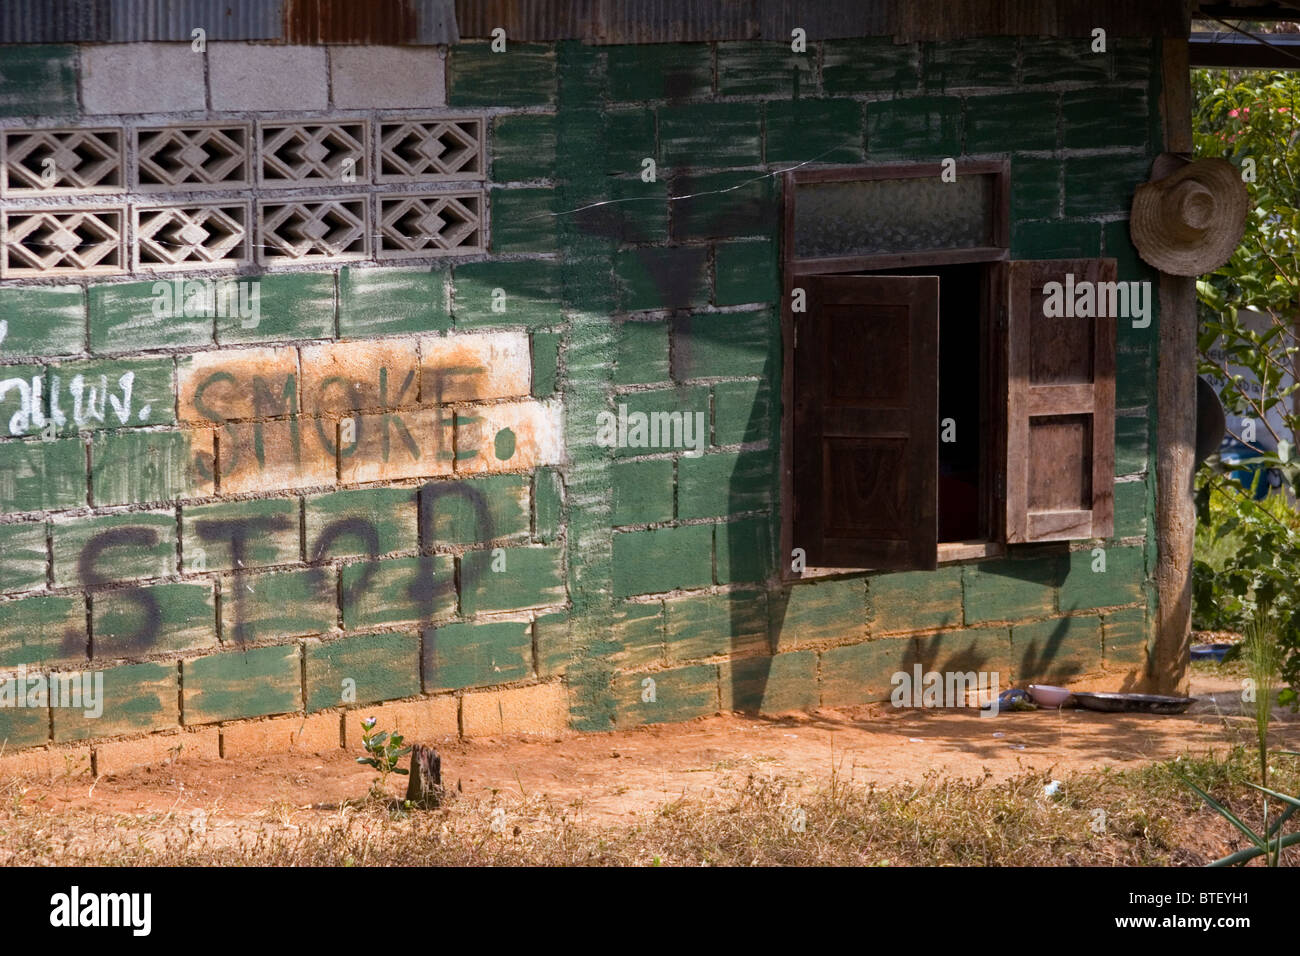 A sign advises travelers of the location of a rural store selling tobacco near Pai, Thailand. Stock Photo